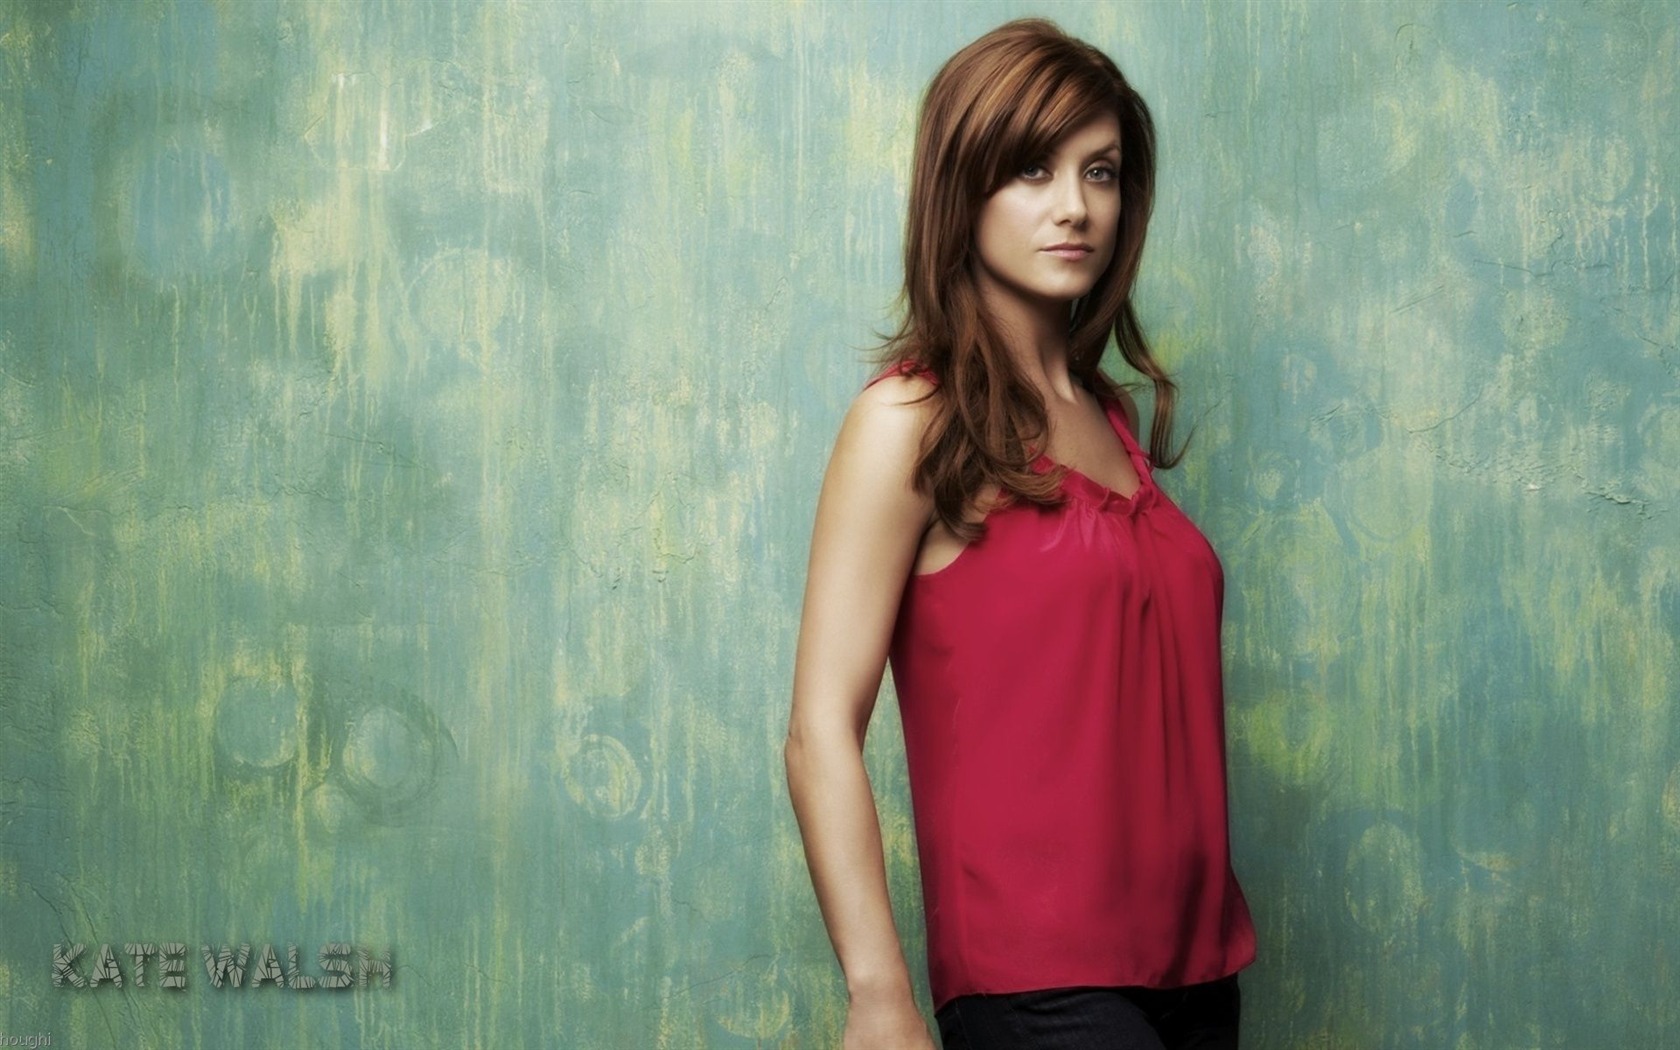 Kate Walsh #008 - 1680x1050 Wallpapers Pictures Photos Images